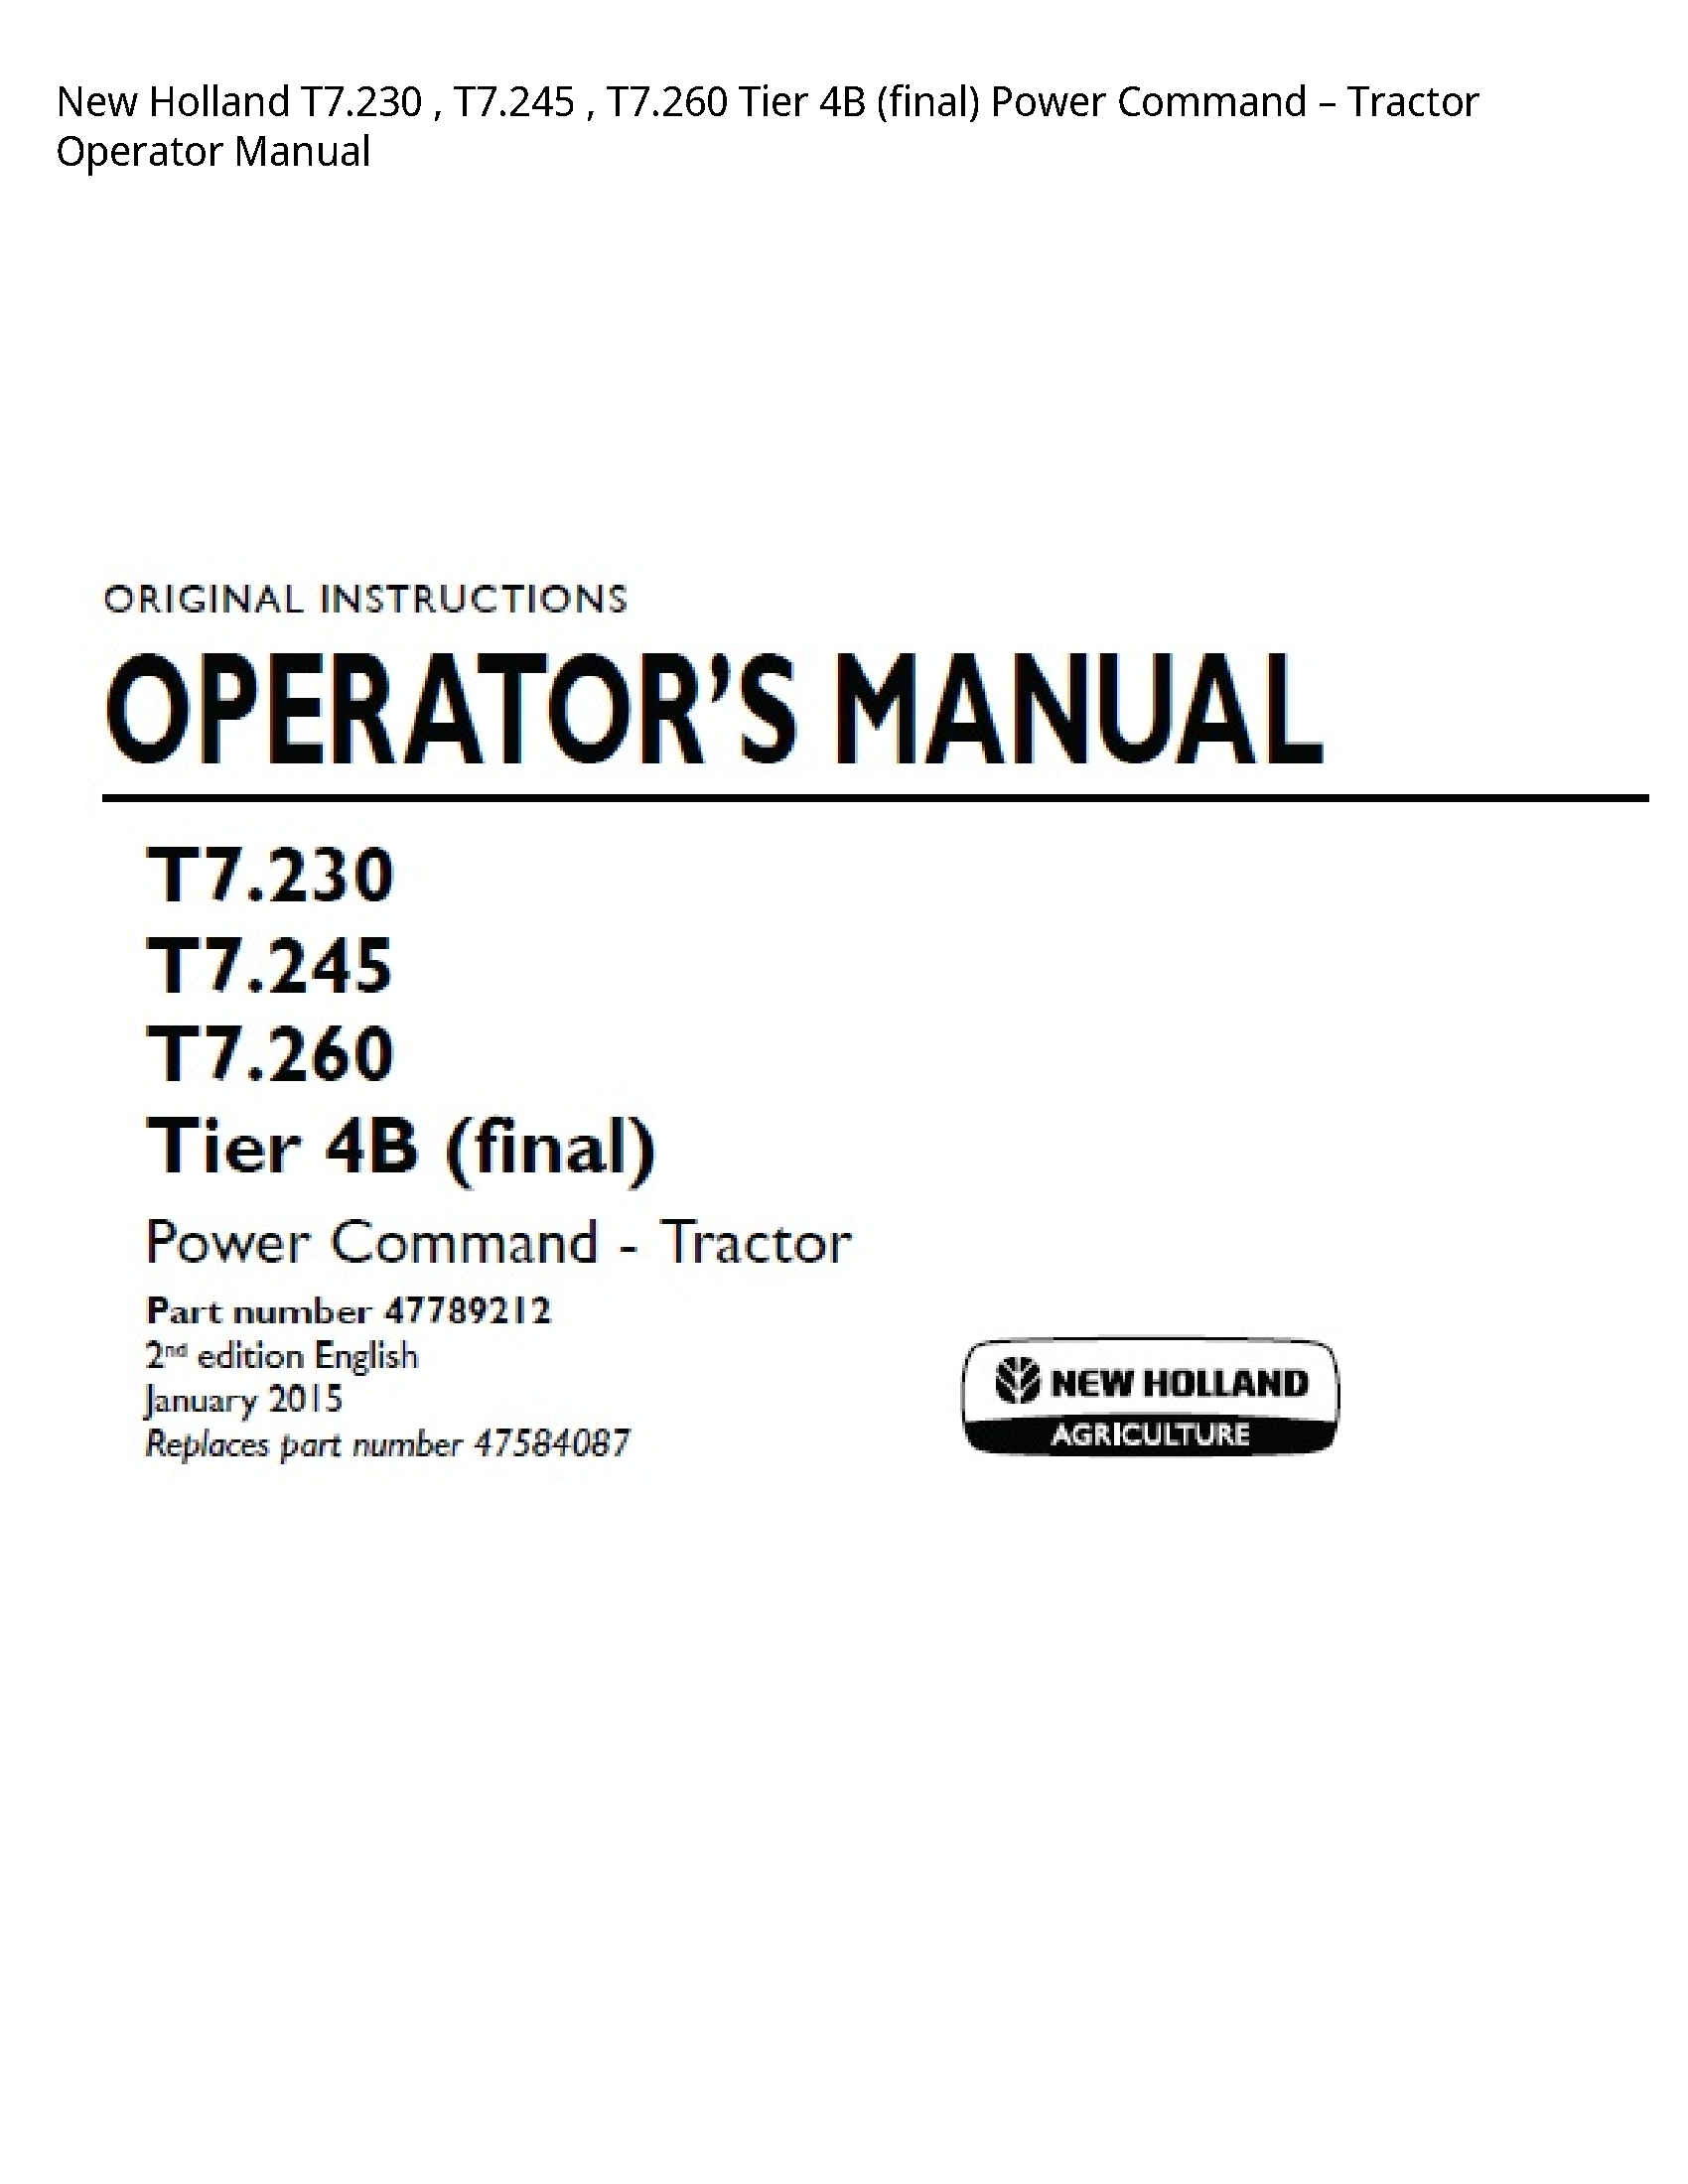 New Holland T7.230 Tier (final) Power Command Tractor Operator manual